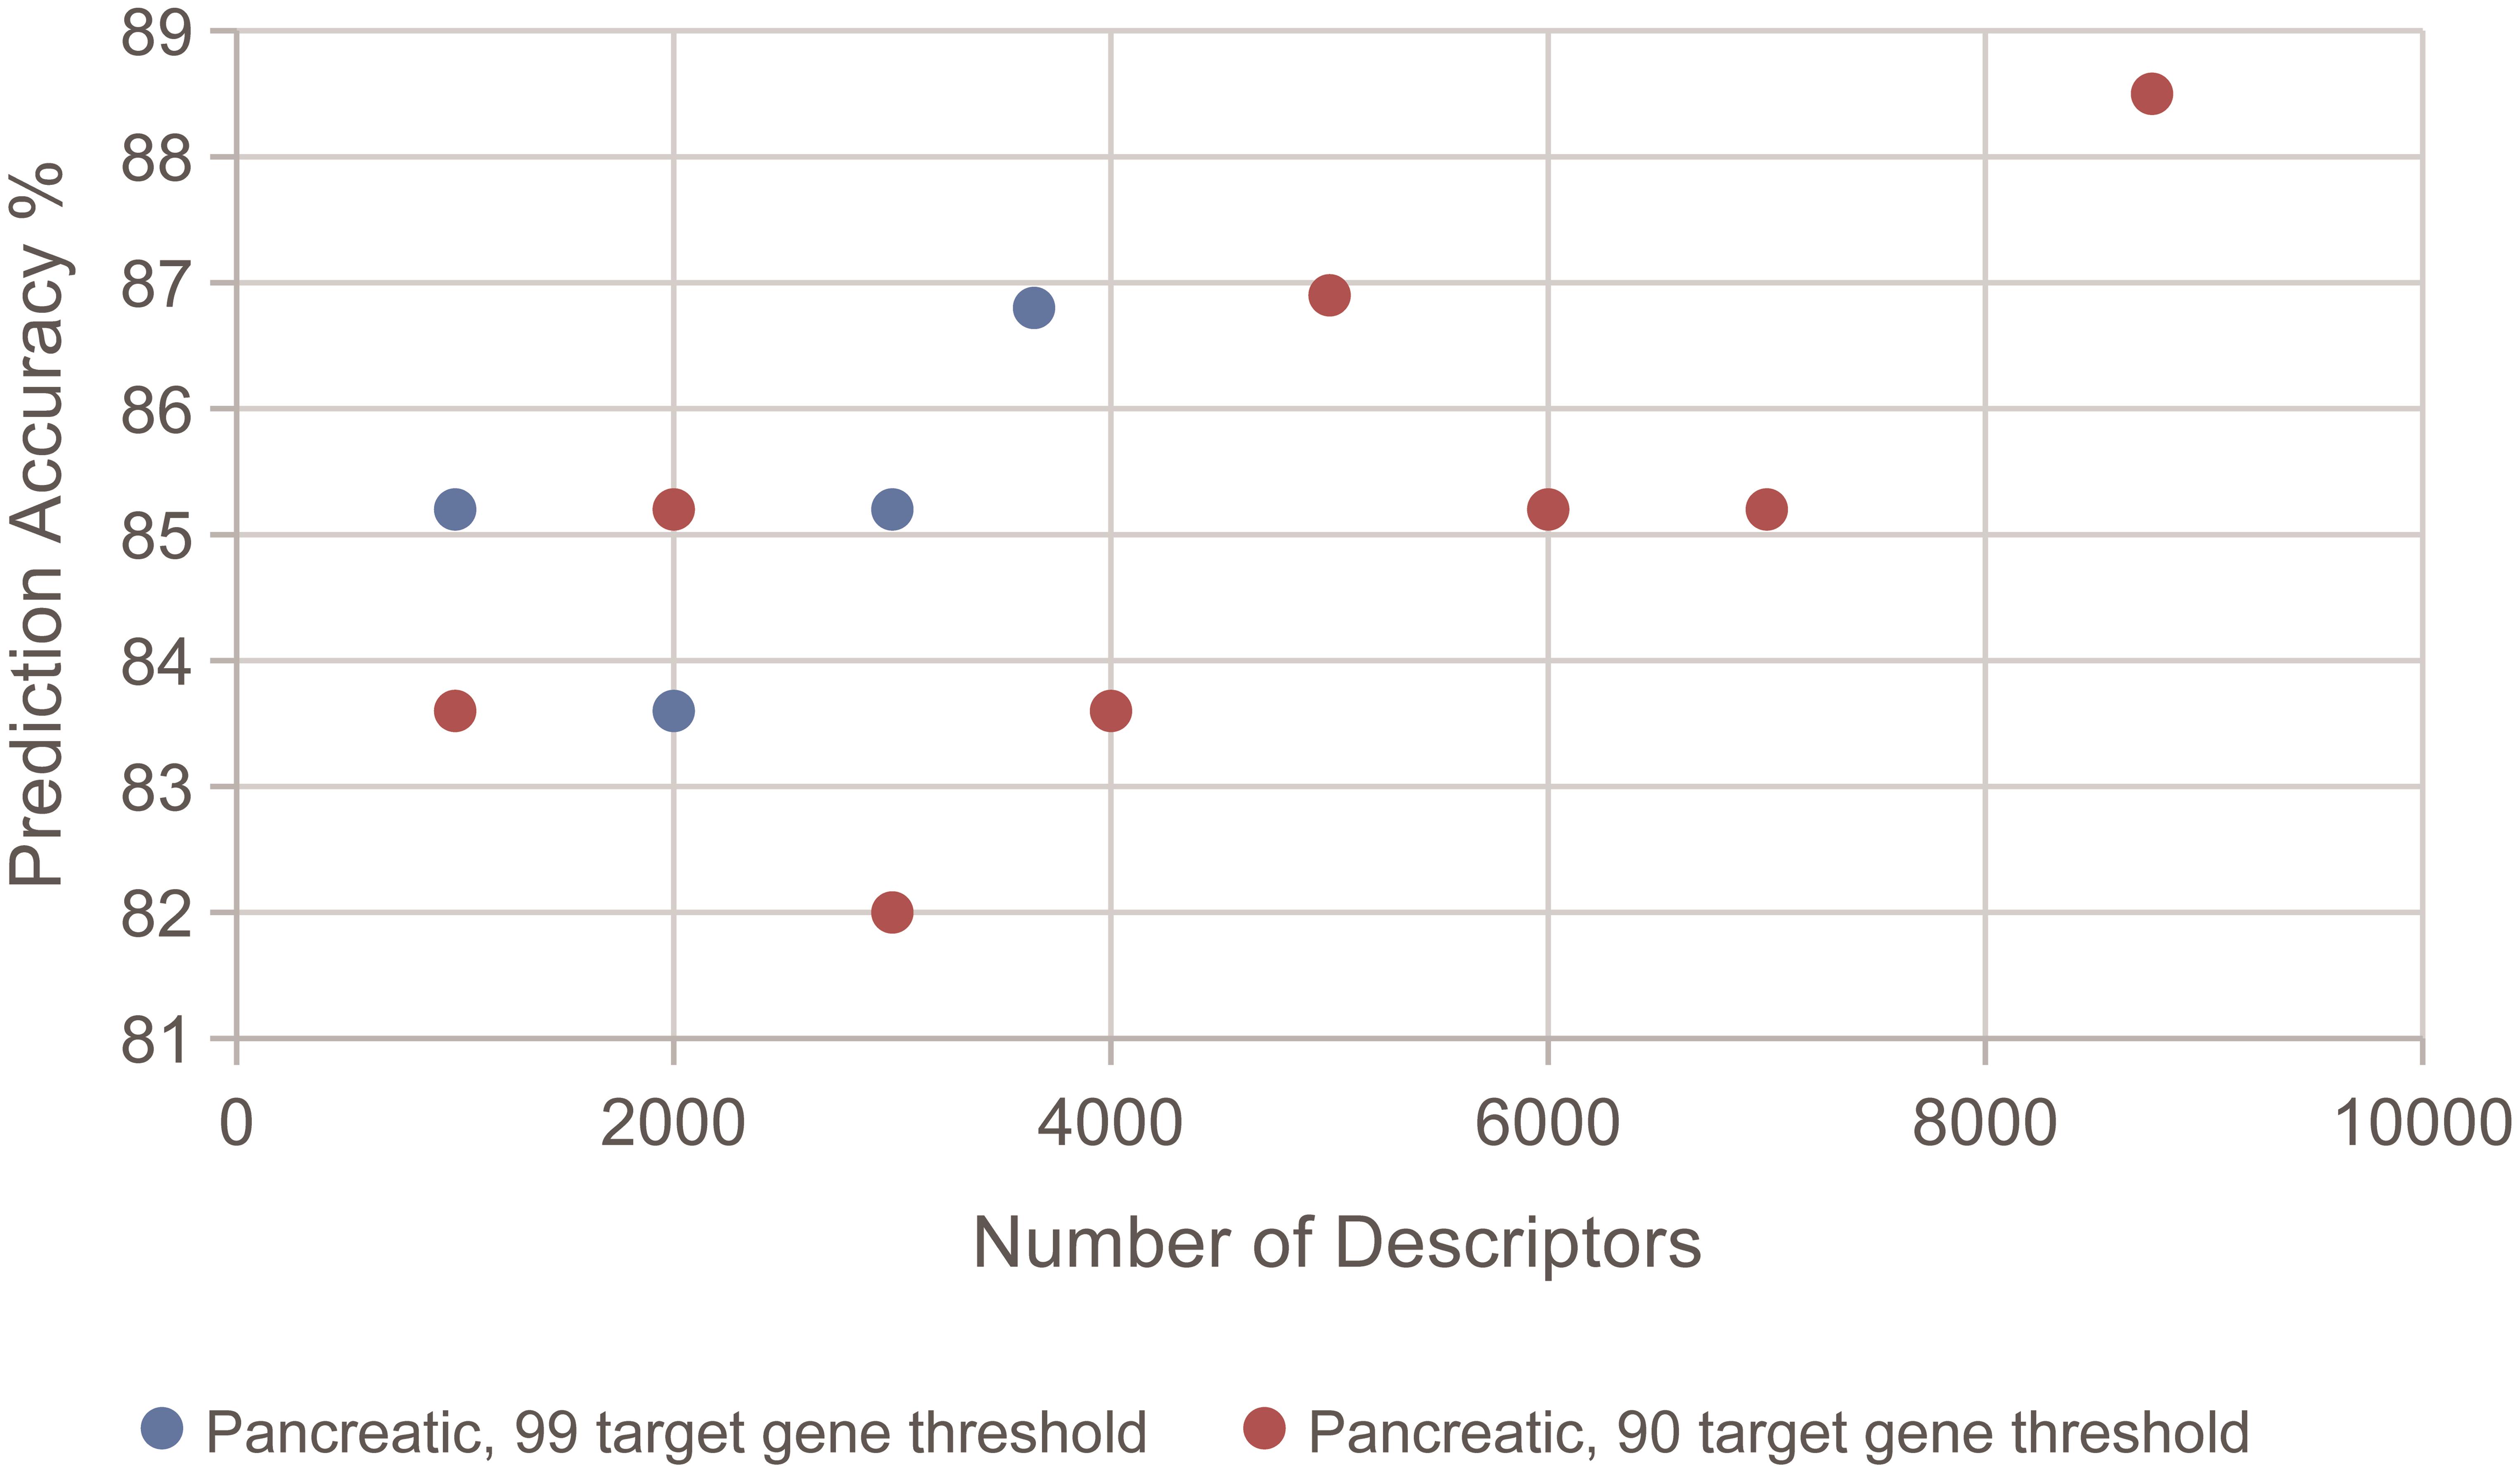 Comparison of the prediction accuracy for the pancreatic cancer model with different numbers of descriptors.